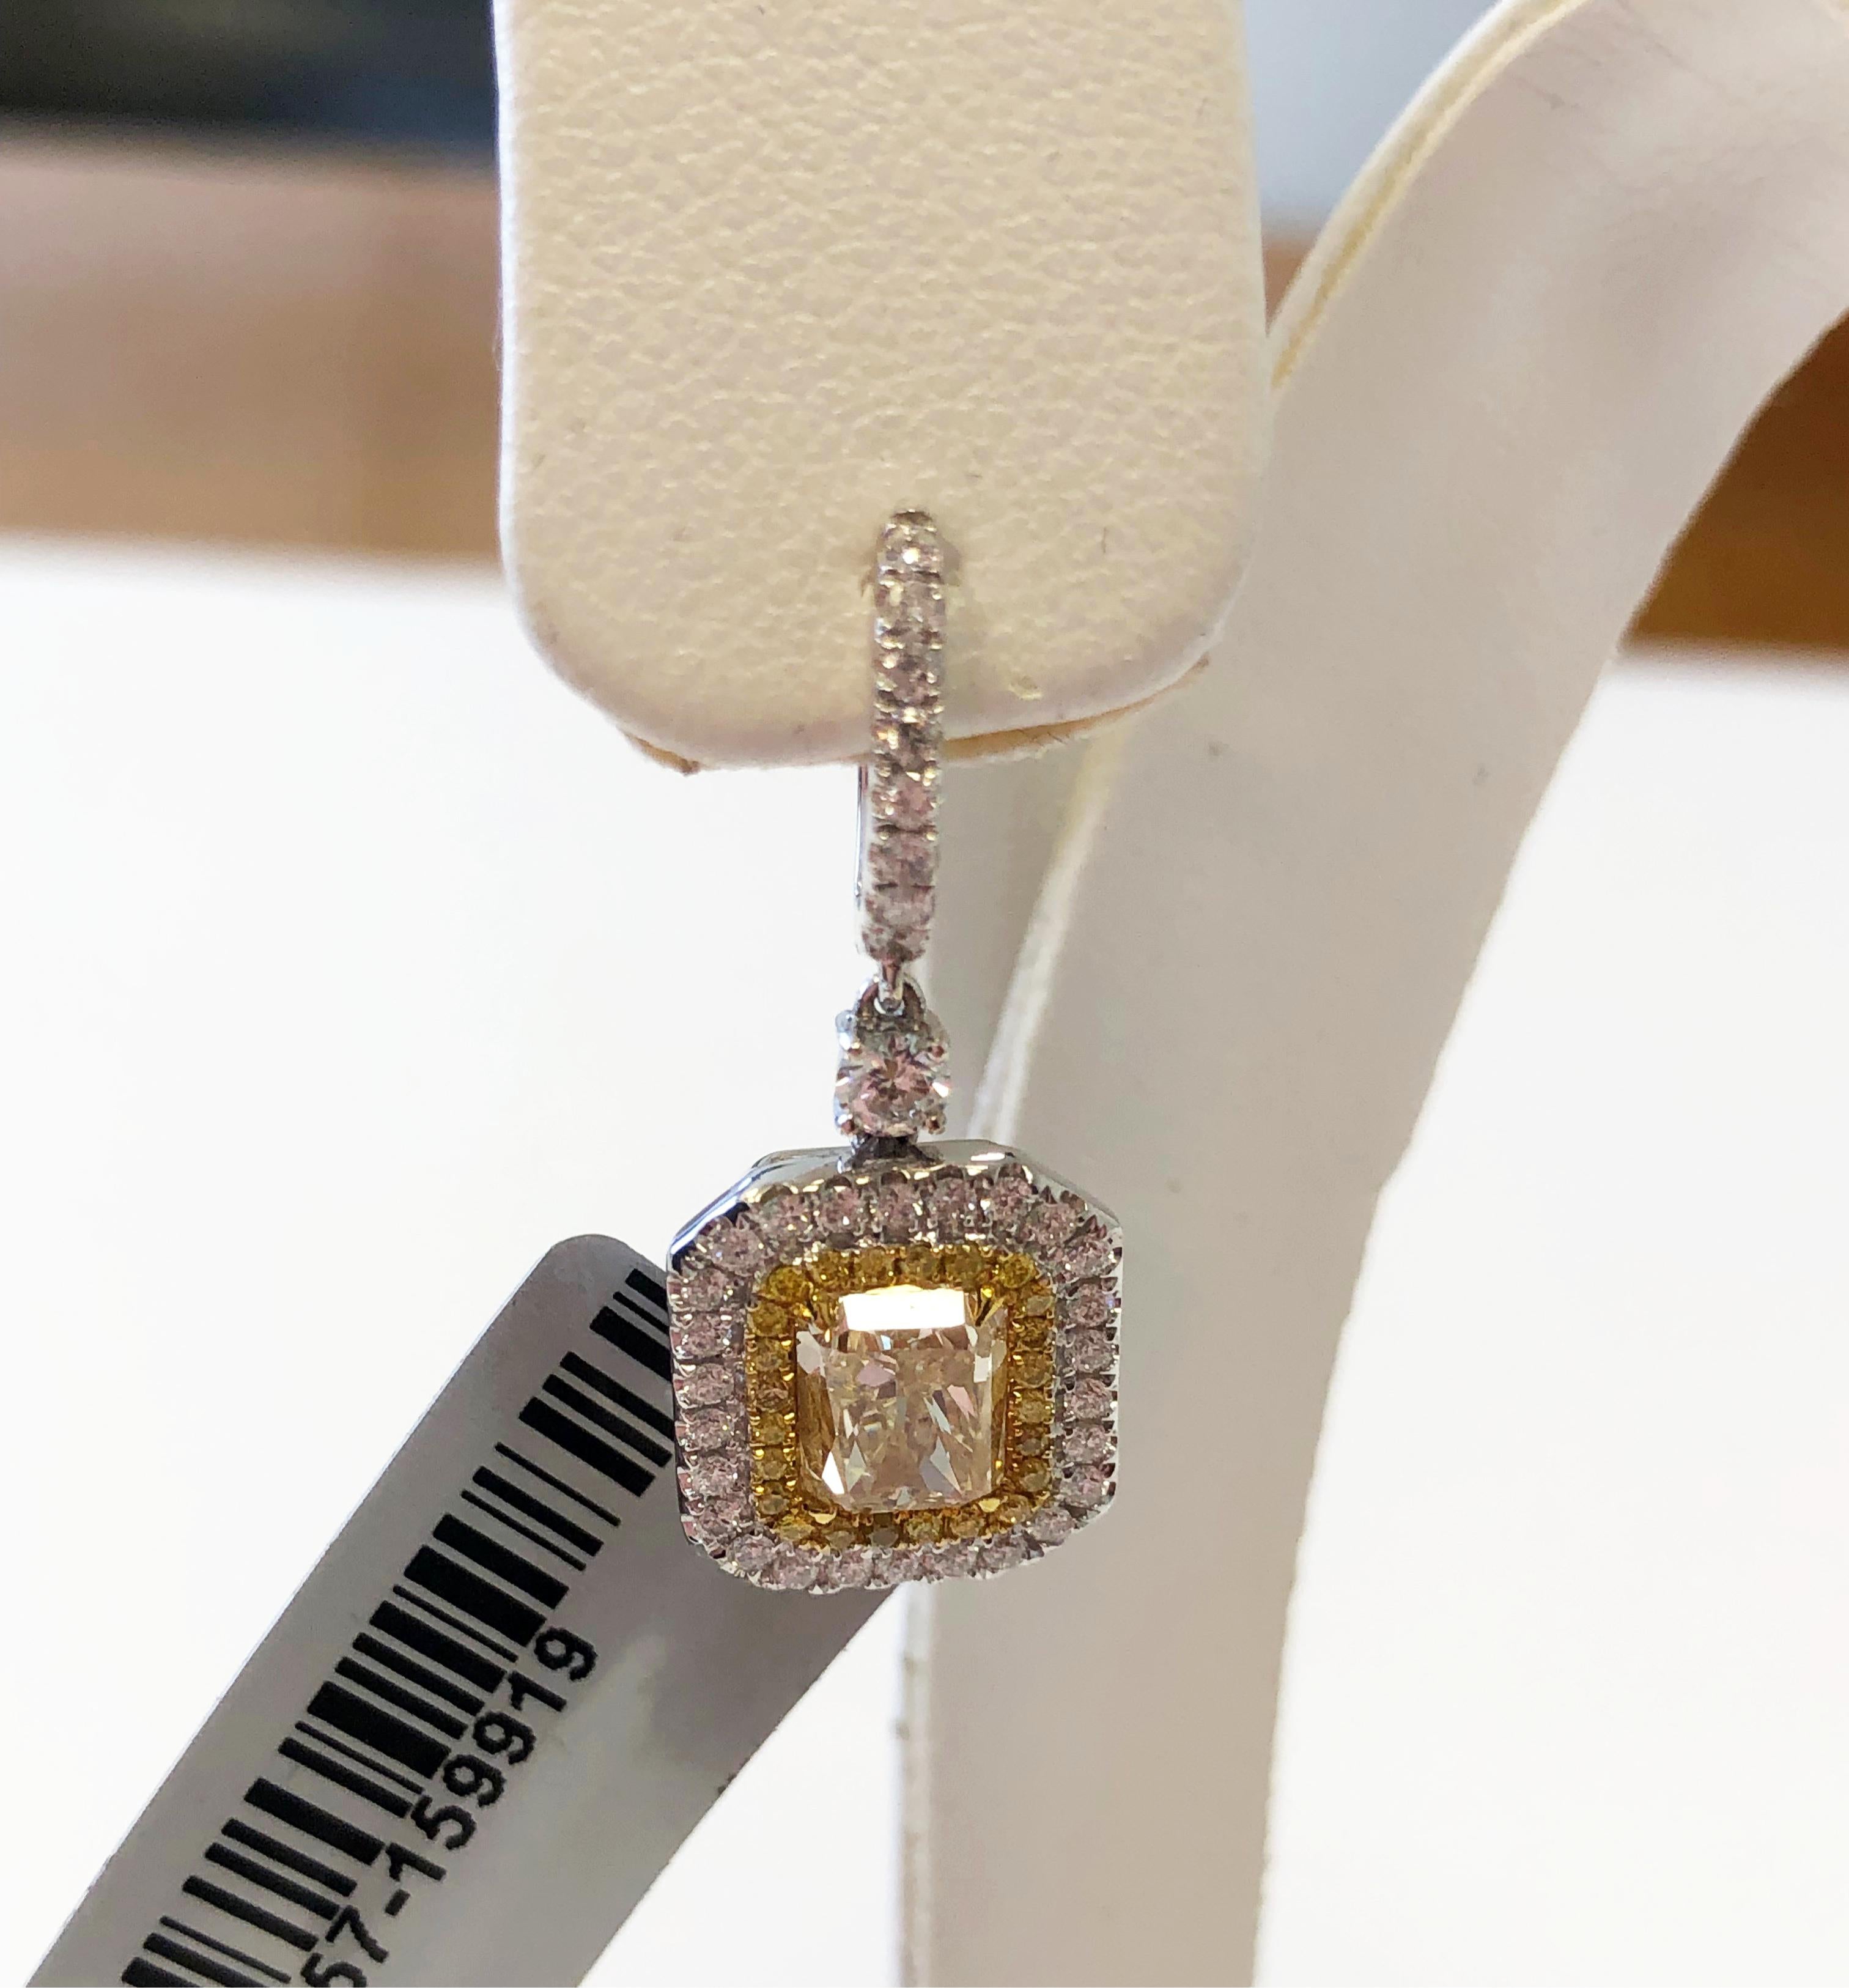 Gorgeous radiant yellow diamonds with bright white diamonds in this classic dangle earring. Yellow radiants weigh 3.06 carats with 0.97 carats of white diamonds. Handmade 18k yellow gold mounting.
